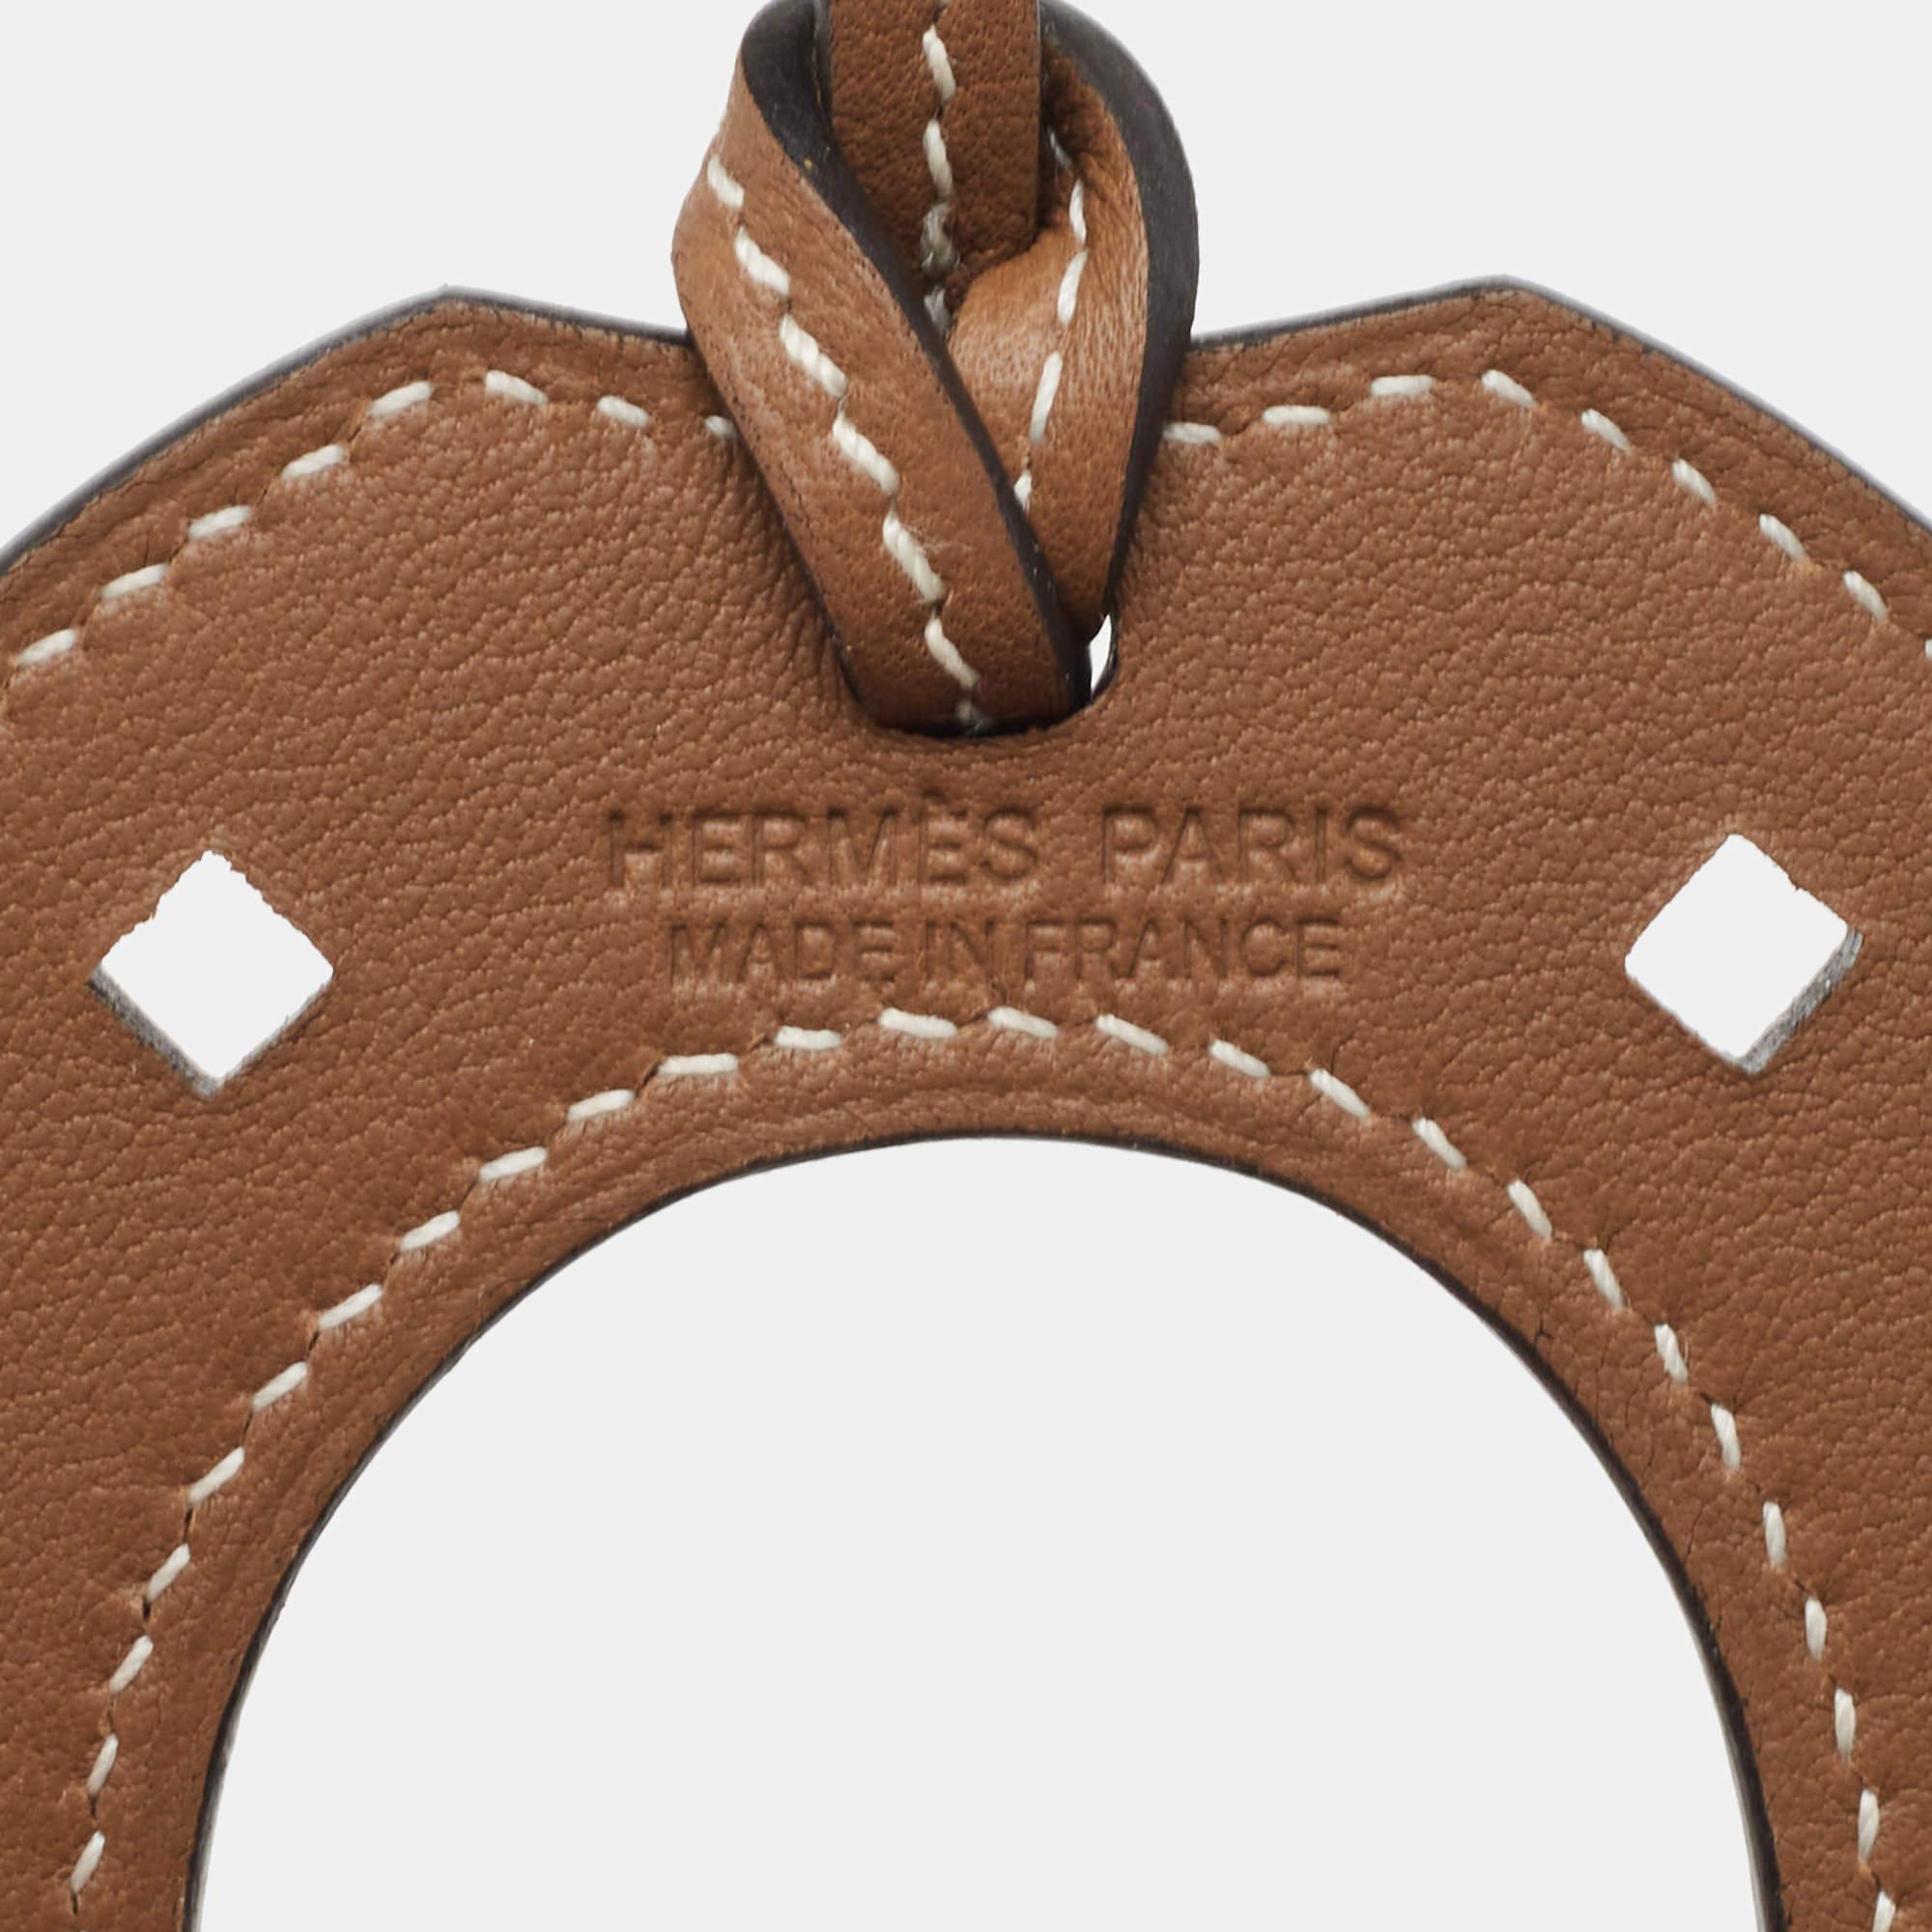 Paying homage to its equestrian heritage, this 'Paddock Fer a Cheval' bag charm from Hermès is a classy accessory to own. It is crafted using Swift leather and hangs from a strap. Needless to say, this Hermès bag charm will add a signature touch to